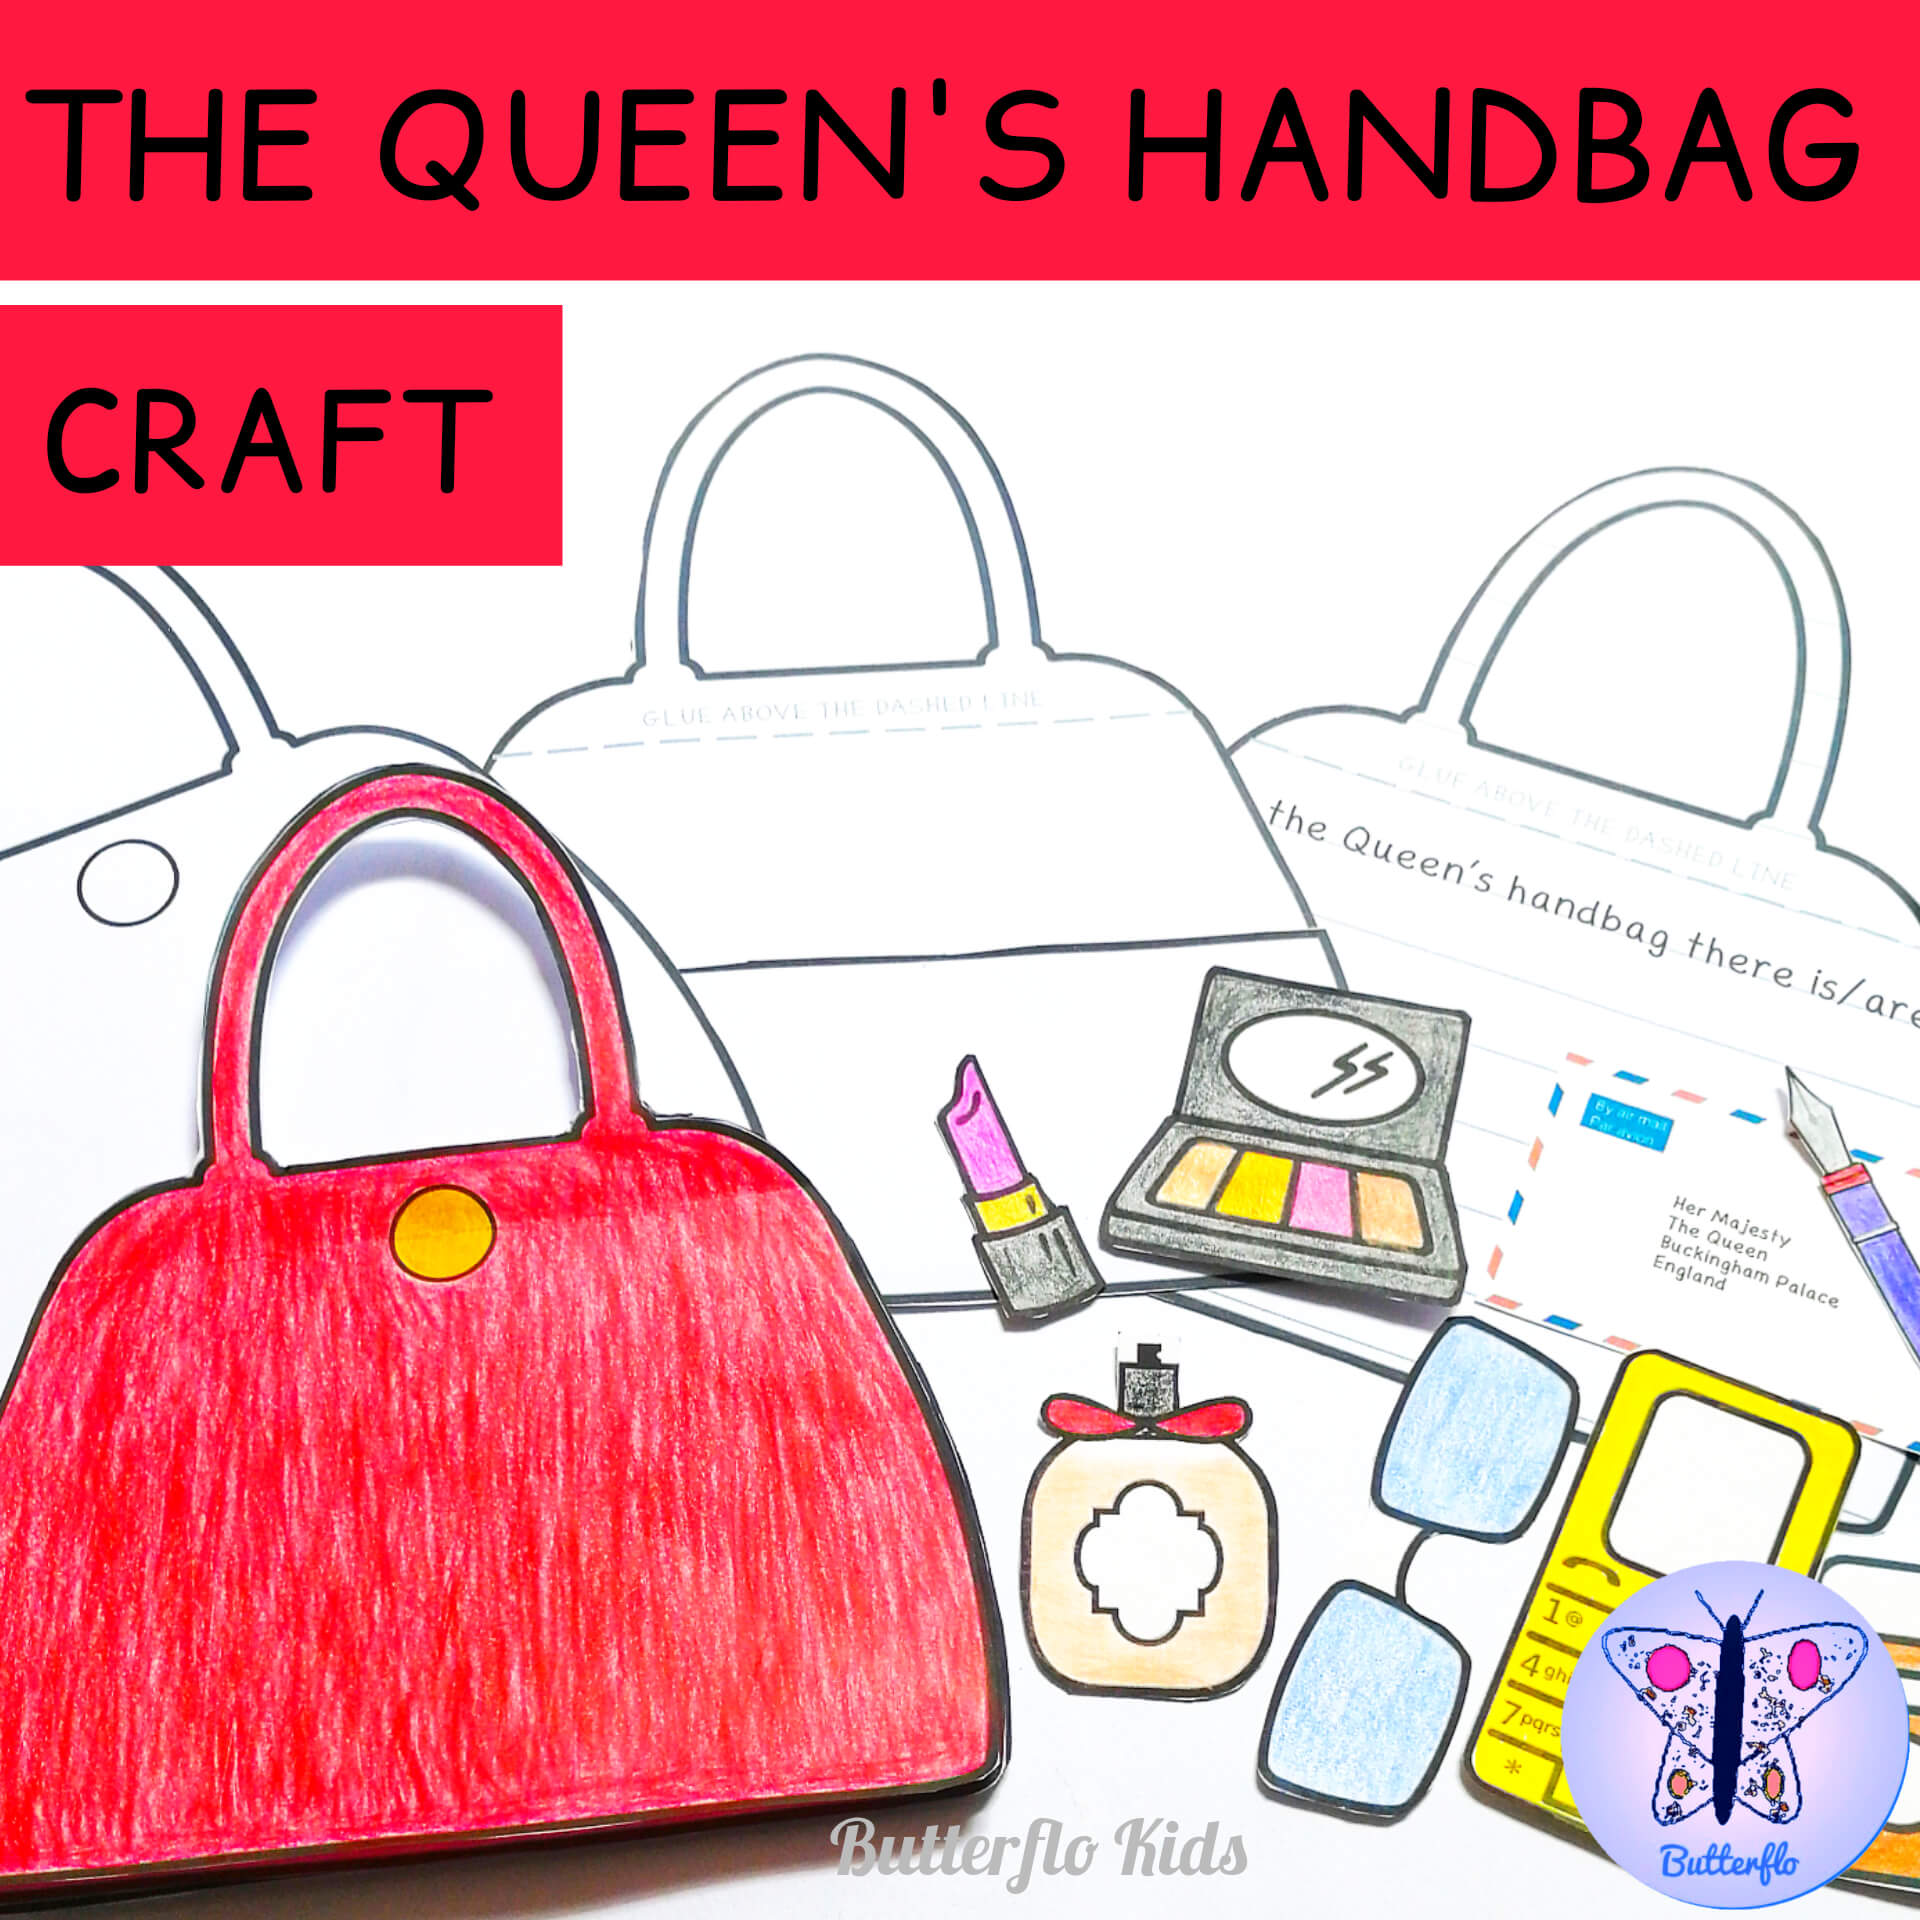 Royal family news: Queen's handbag contents revealed, Royal, News